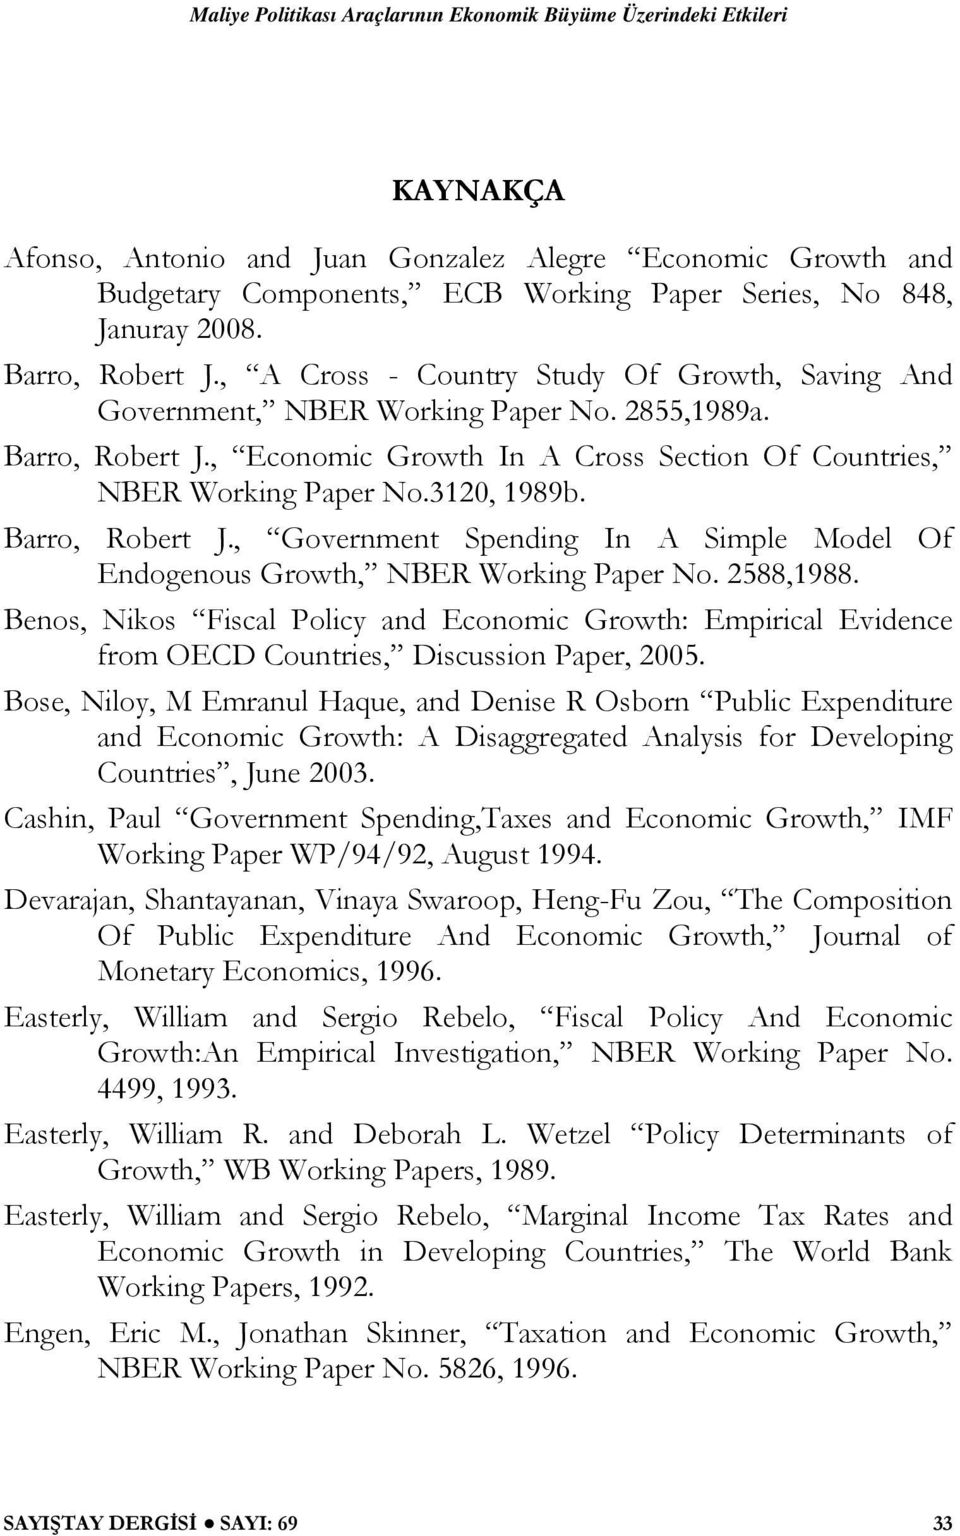 Barro, Robert J., Government Spending In A Simple Model Of Endogenous Growth, NBER Working Paper No. 2588,1988.